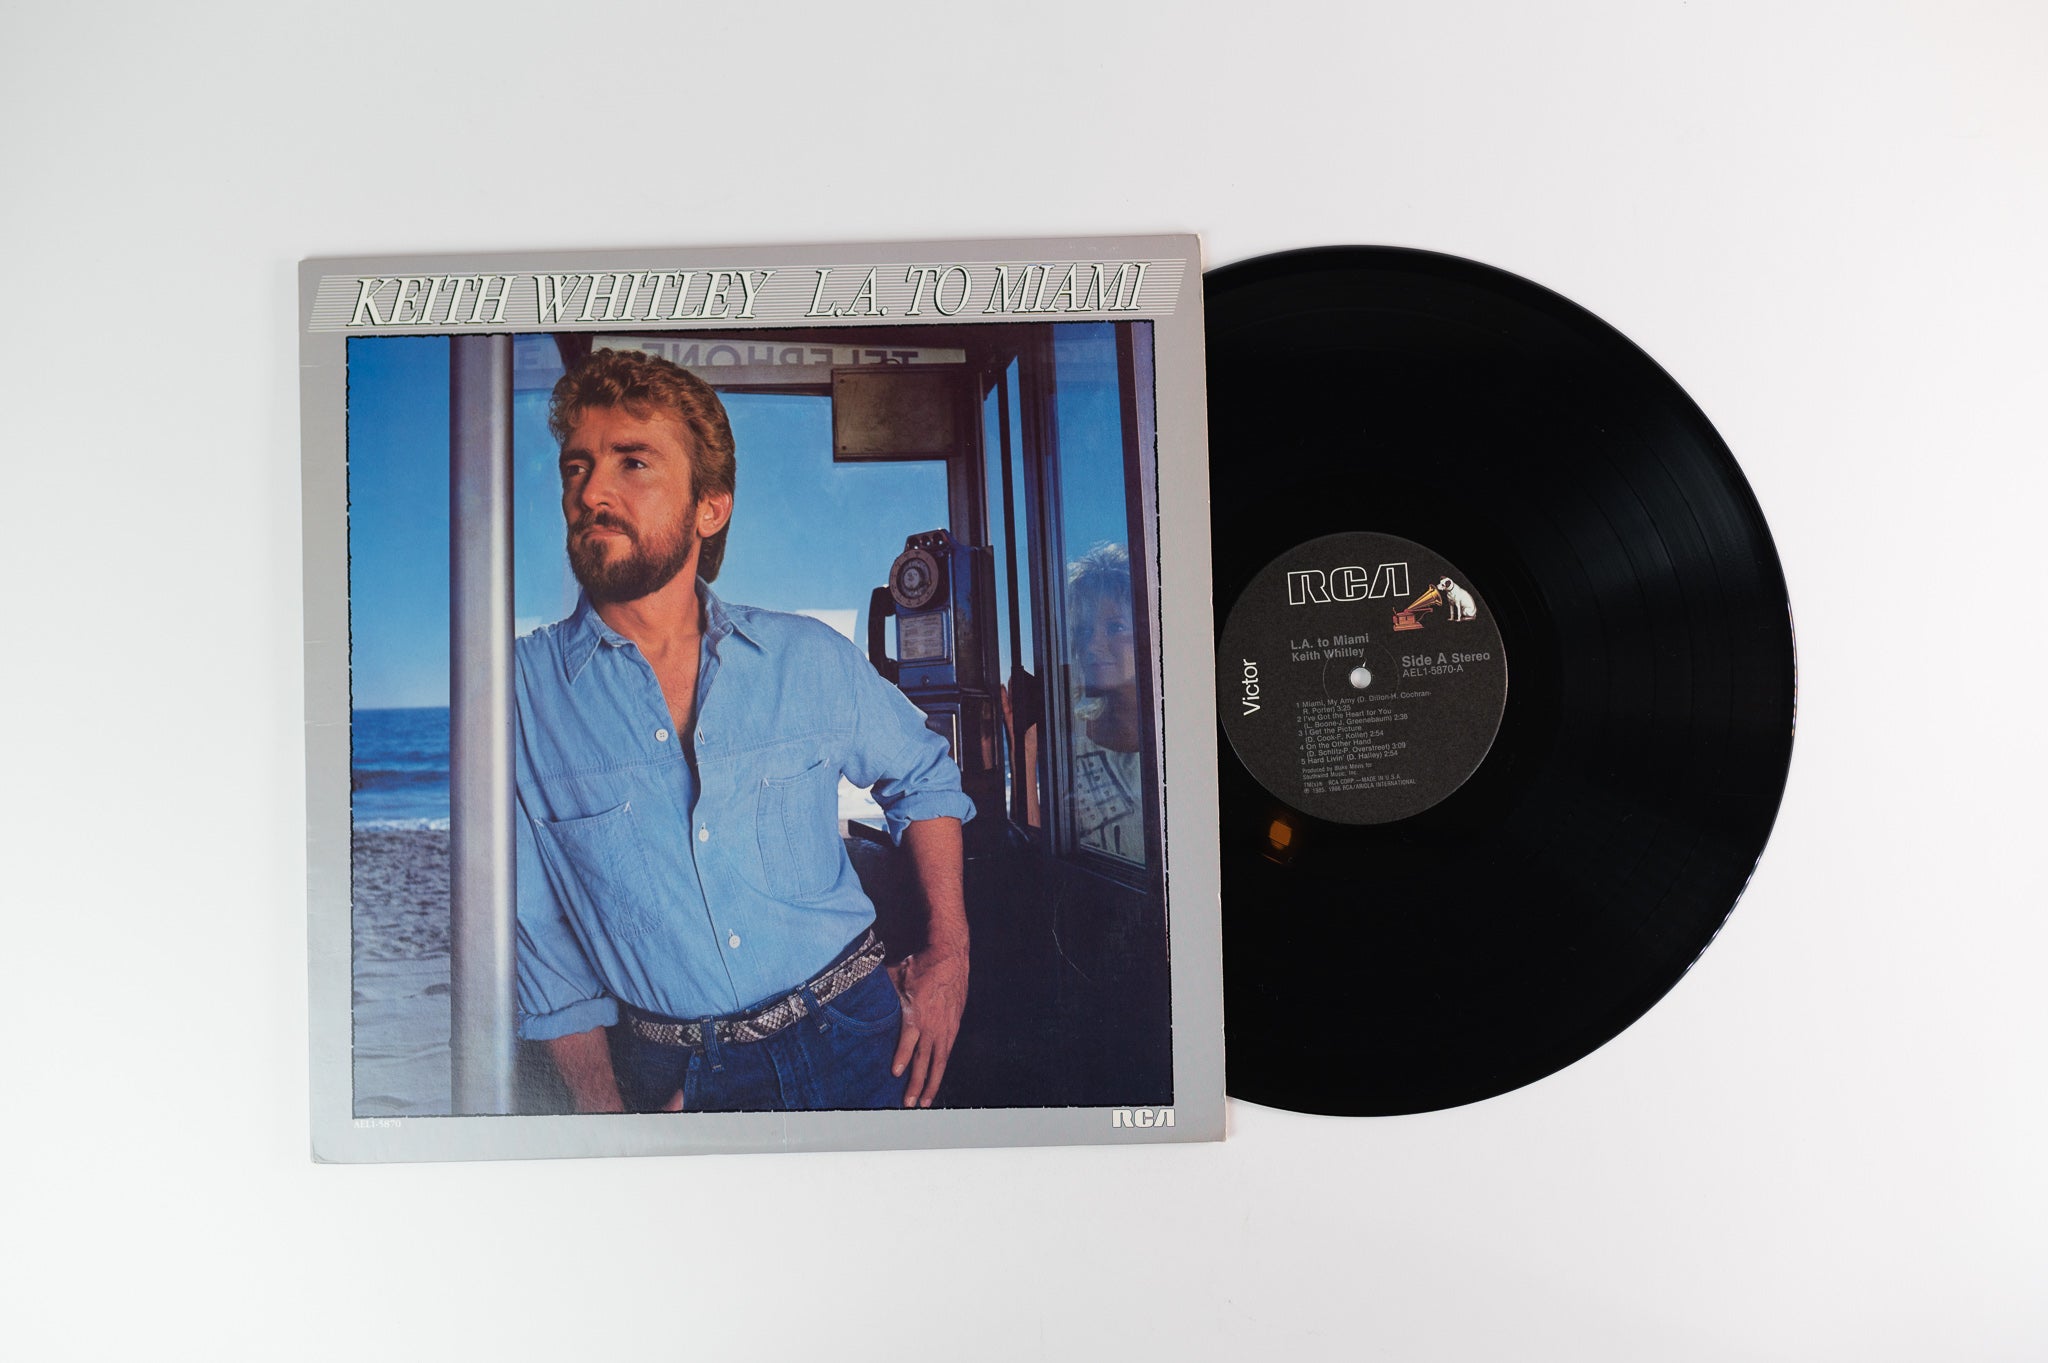 Keith Whitley - L.A. To Miami on RCA Victor